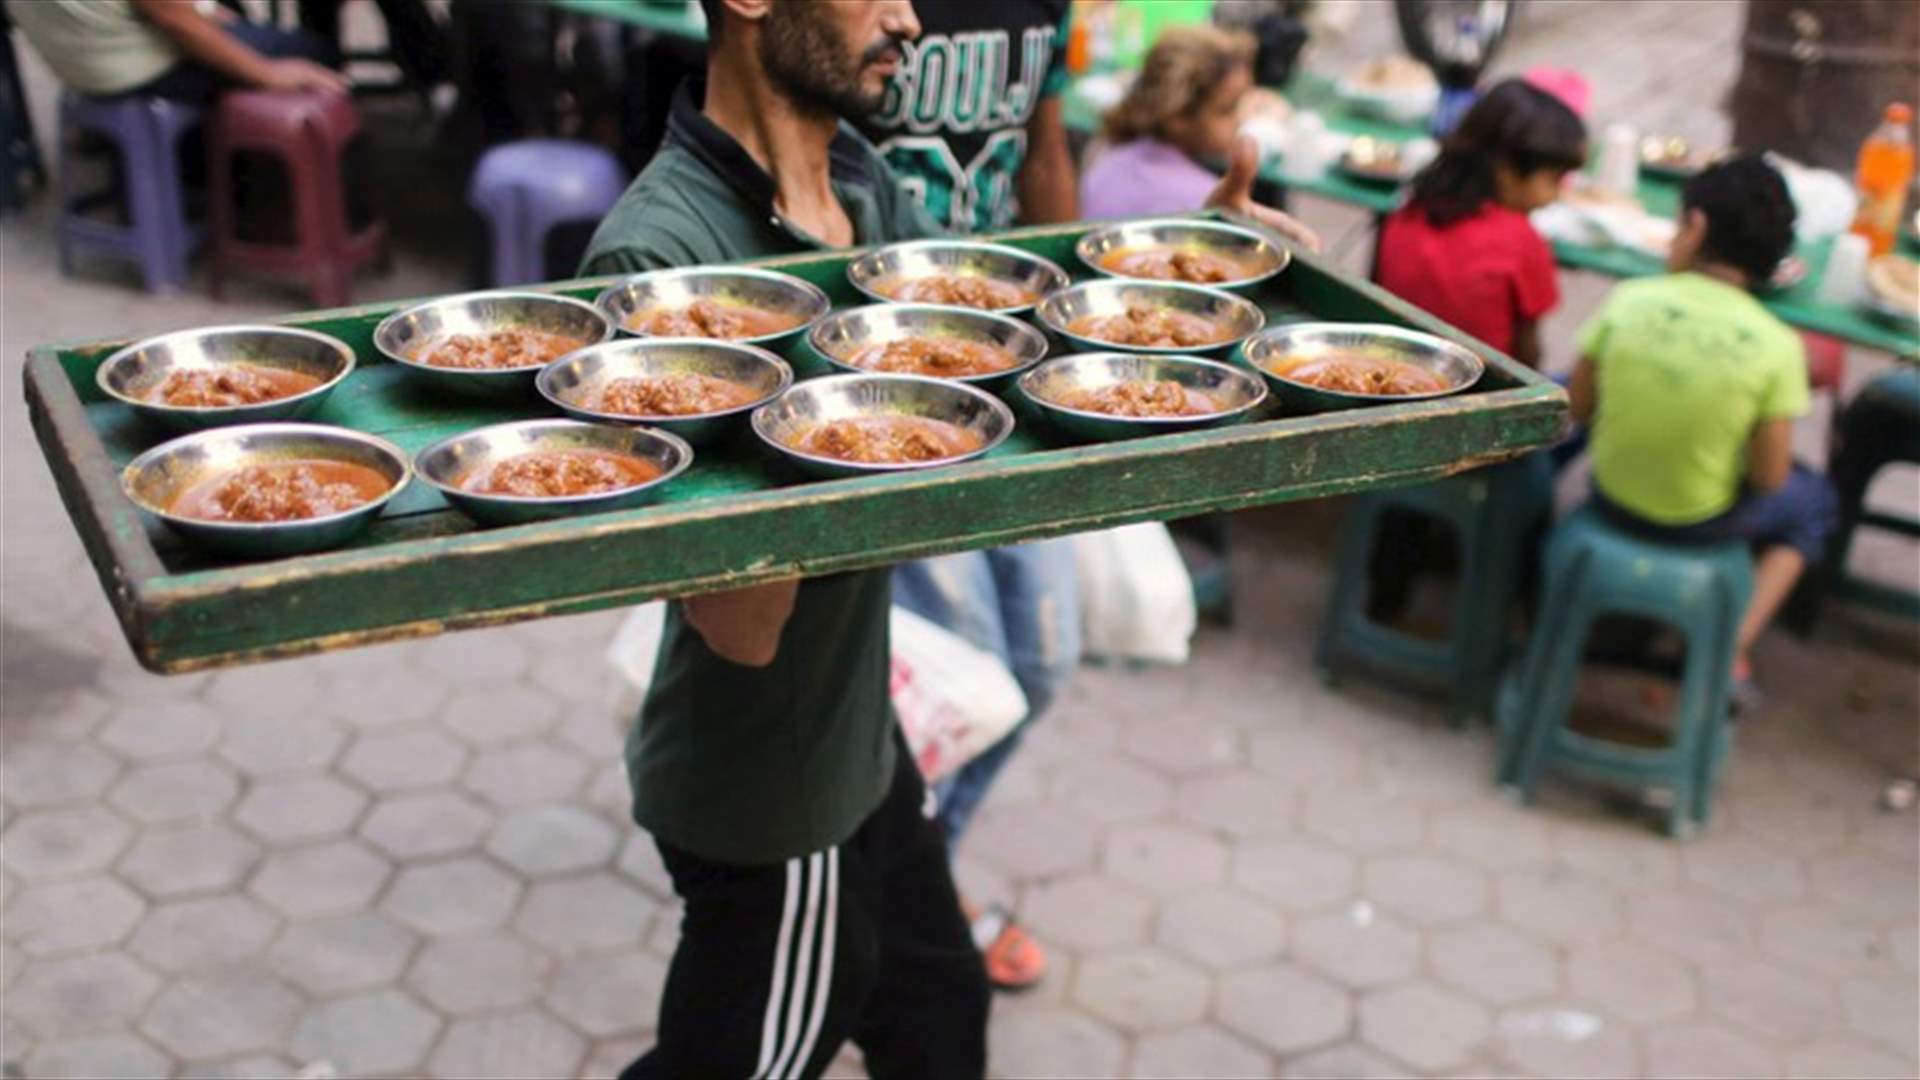 Cairo restaurant offers free meals to needy